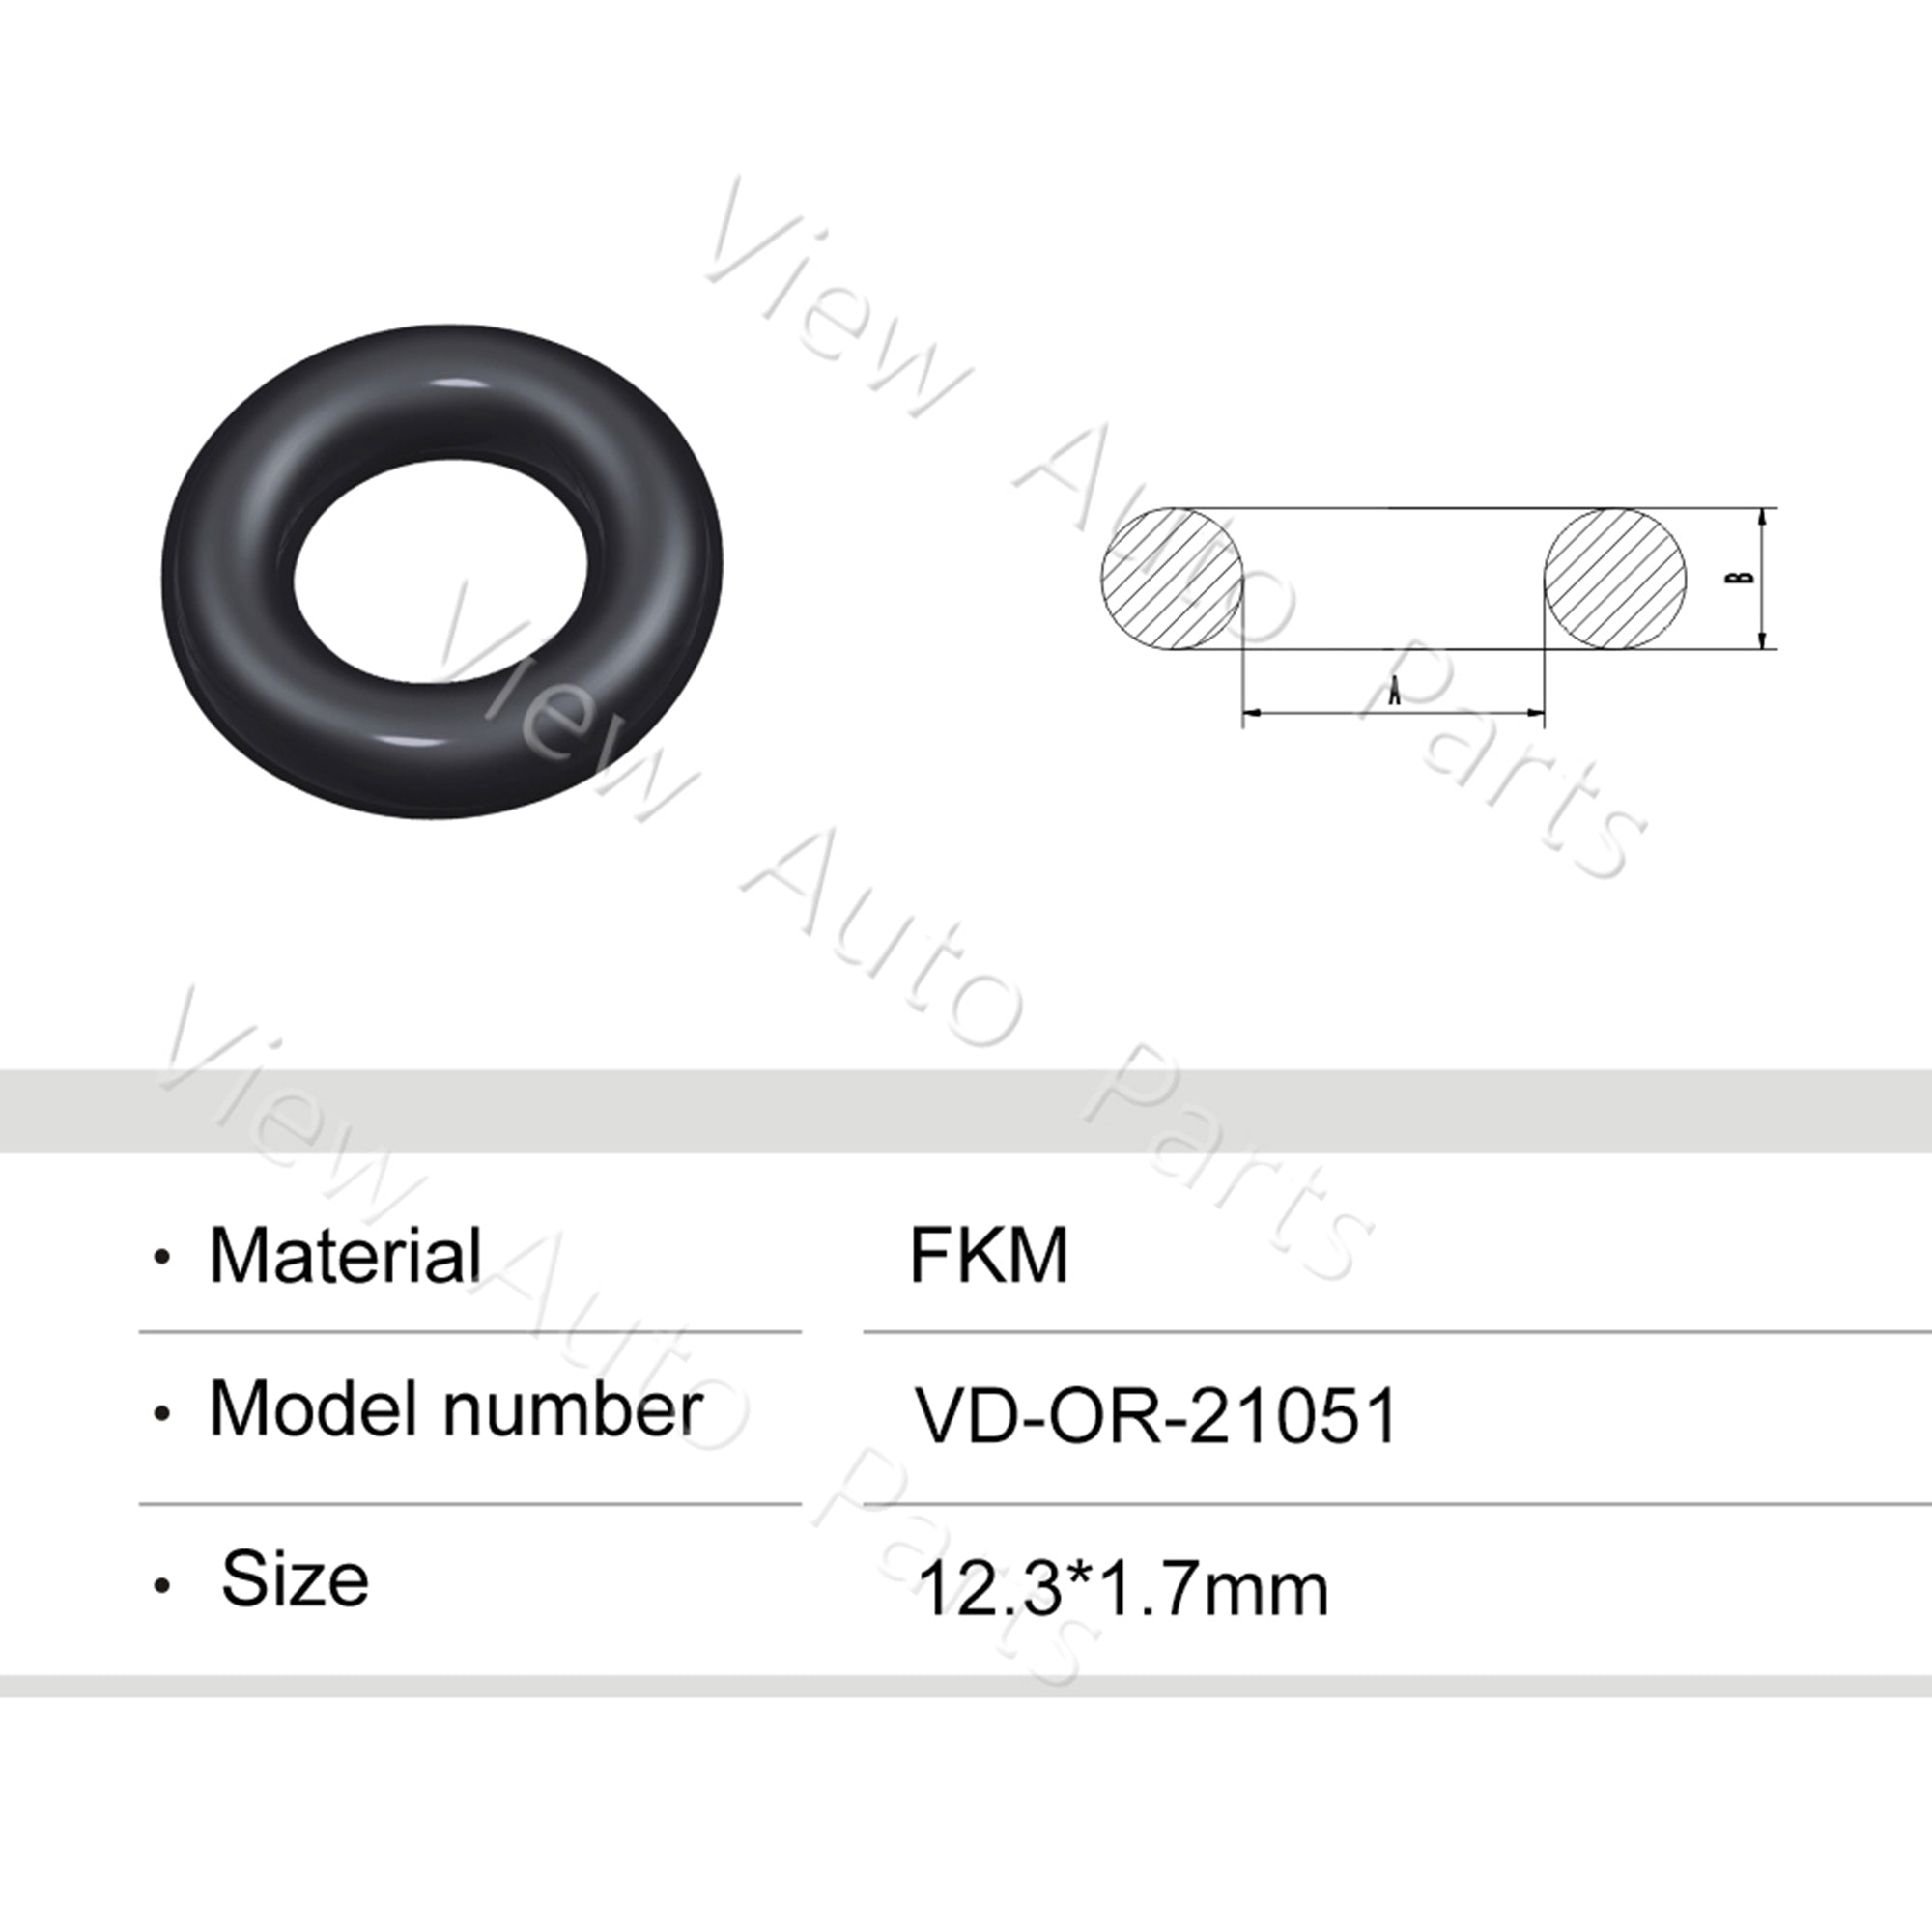 Fuel Injector Rubber Seal Orings for Fuel Injector Repair Kits FKM & Rubber Heat Resistant, Size: 12.3*1.7mm OR-21051